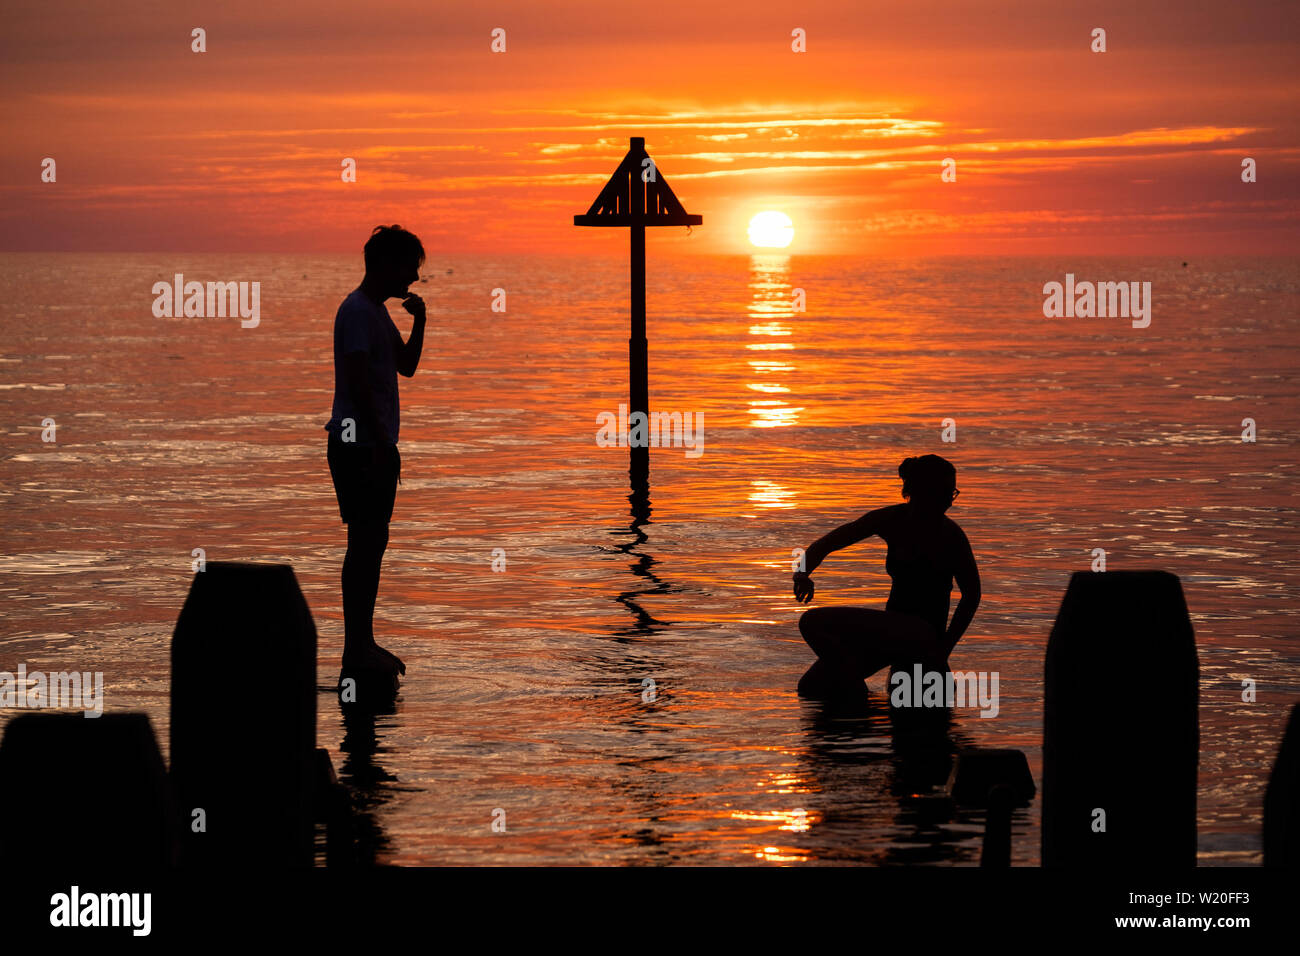 Aberystwyth Wales UK, Thursday 04 July 2019  UK Weather: A young couple are silhouetted against the sky as they balance on the wooden jetty  in the flat calm sea and watch the glorious sunset in Aberystwyth on the Cardigan Bay coast, west Wales.   photo credit: Keith Morris//Alamy Live News Stock Photo